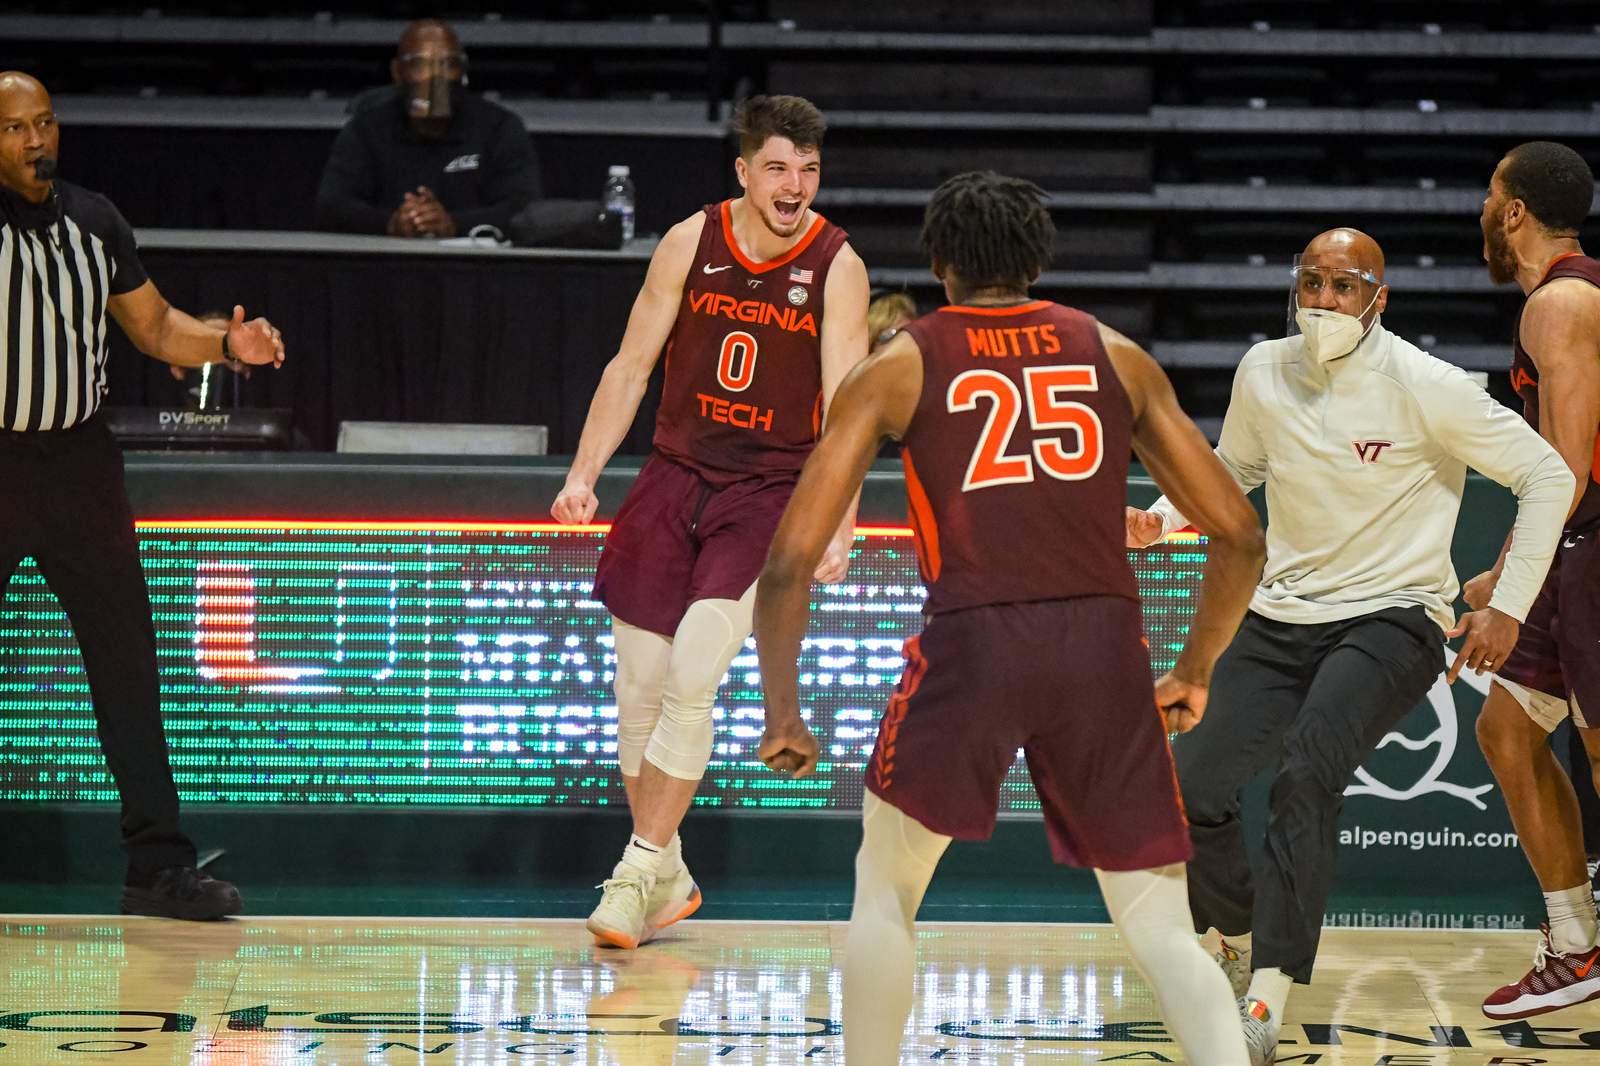 Going dancing: Virginia Tech tabbed as a 10 seed for NCAA Tournament